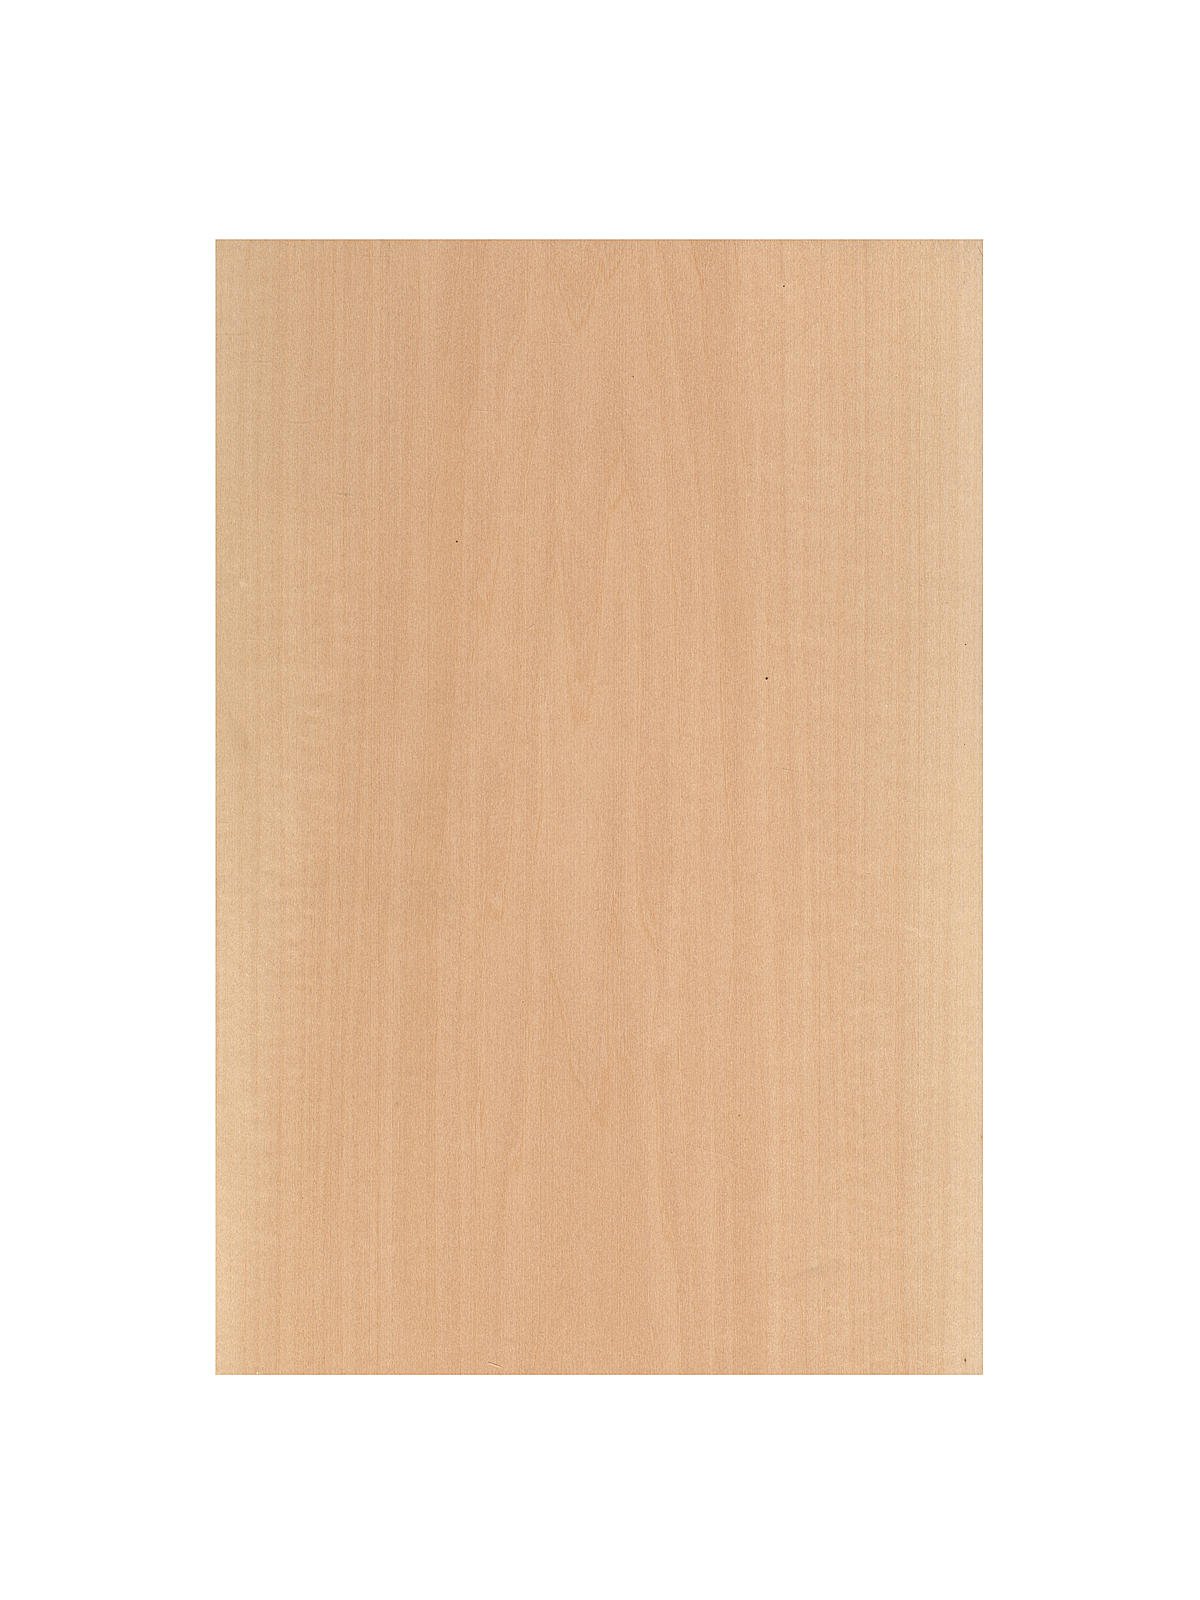 Midwest Products 1/16 in. X 3 in. W X 2 ft. L Basswood Sheet #2